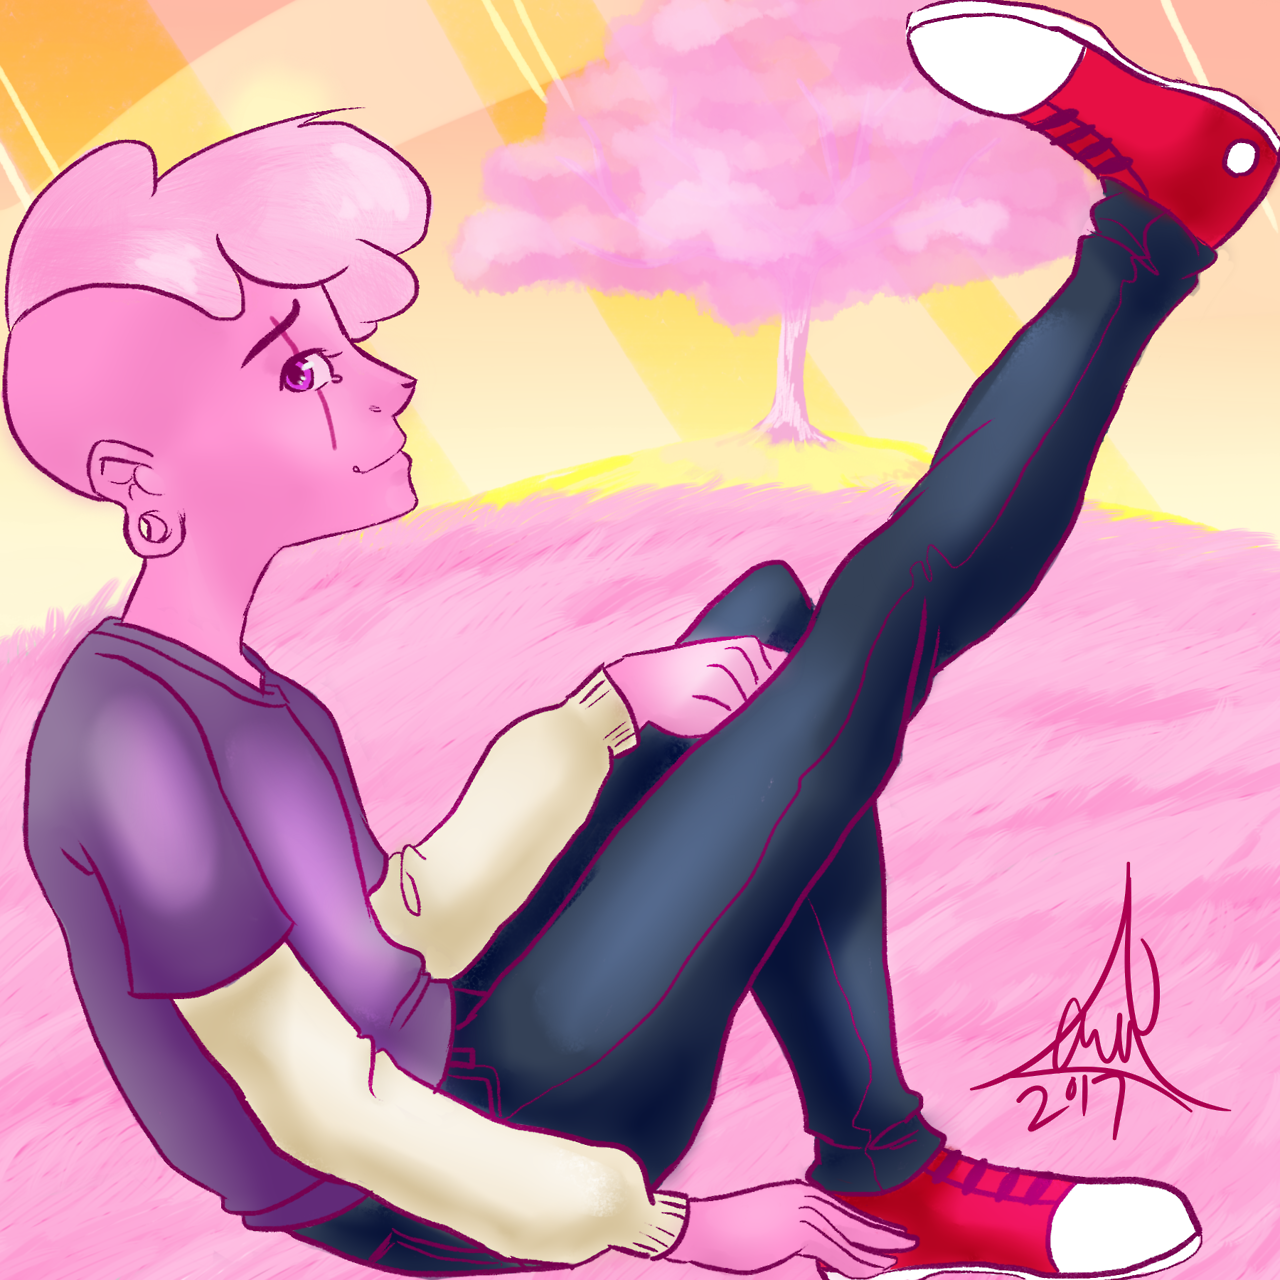 A new pink lars doodle I’m calling “Feeling Pink”. Cute right?!